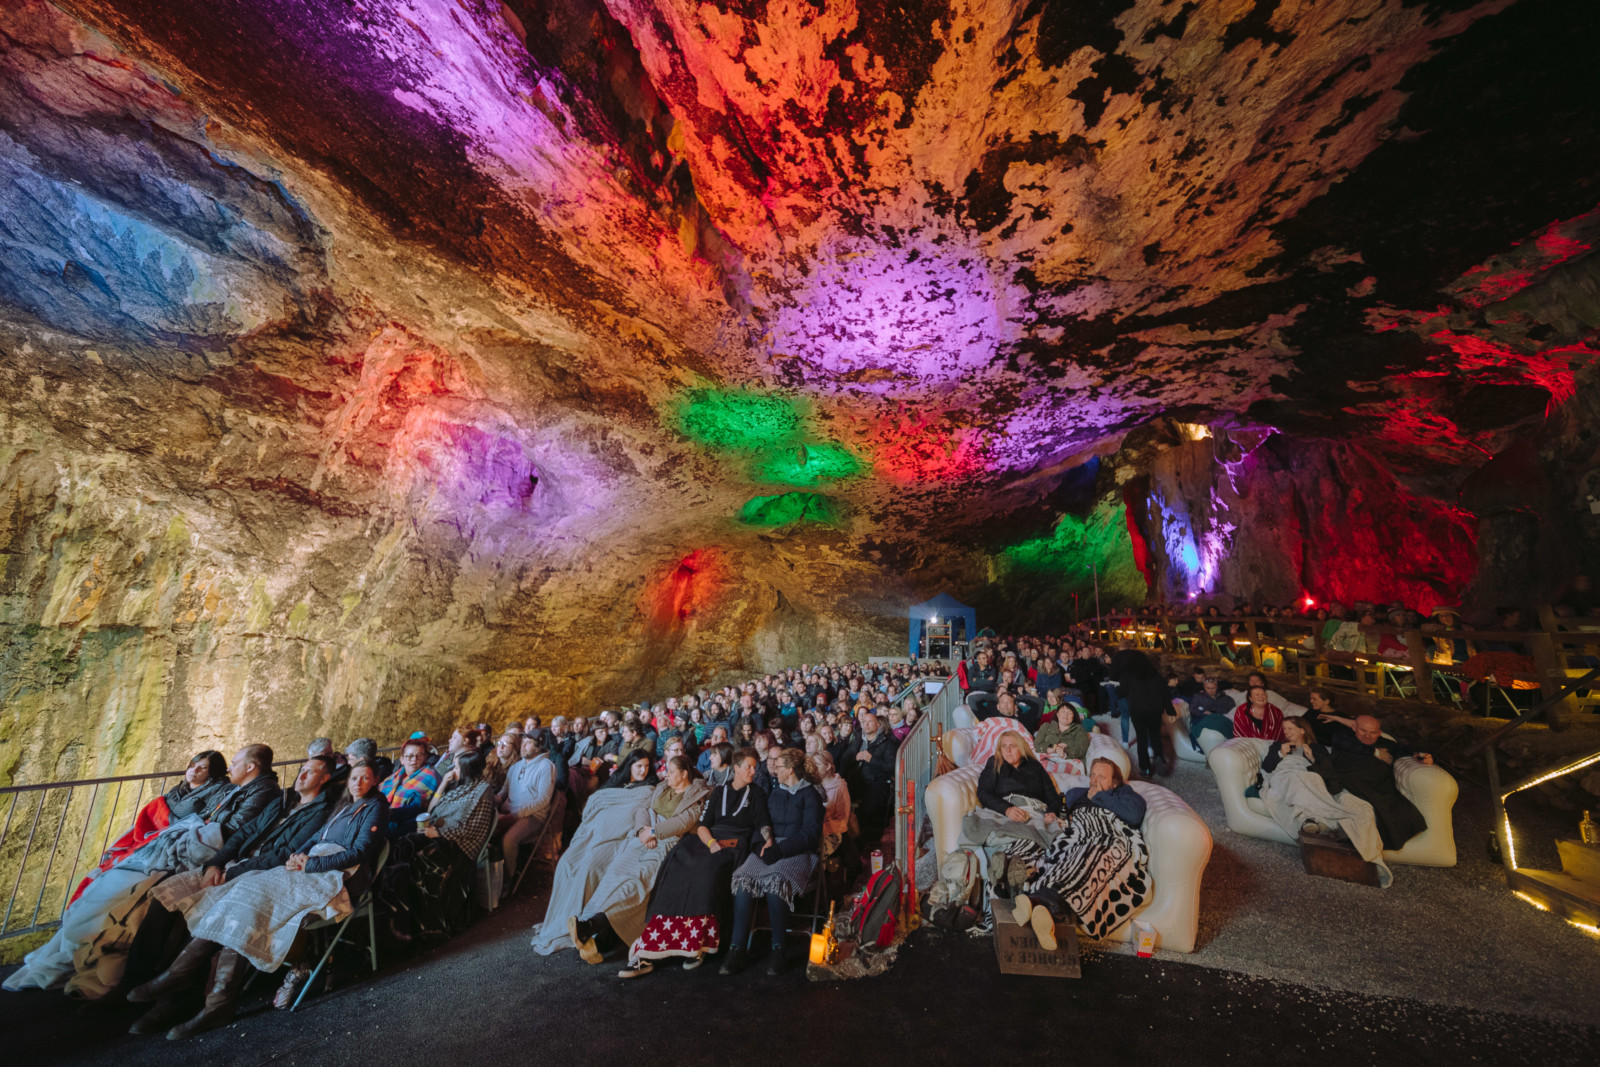 You can watch Jurassic Park, Westside Story, and more inside a Peak District cave next month, The Manc